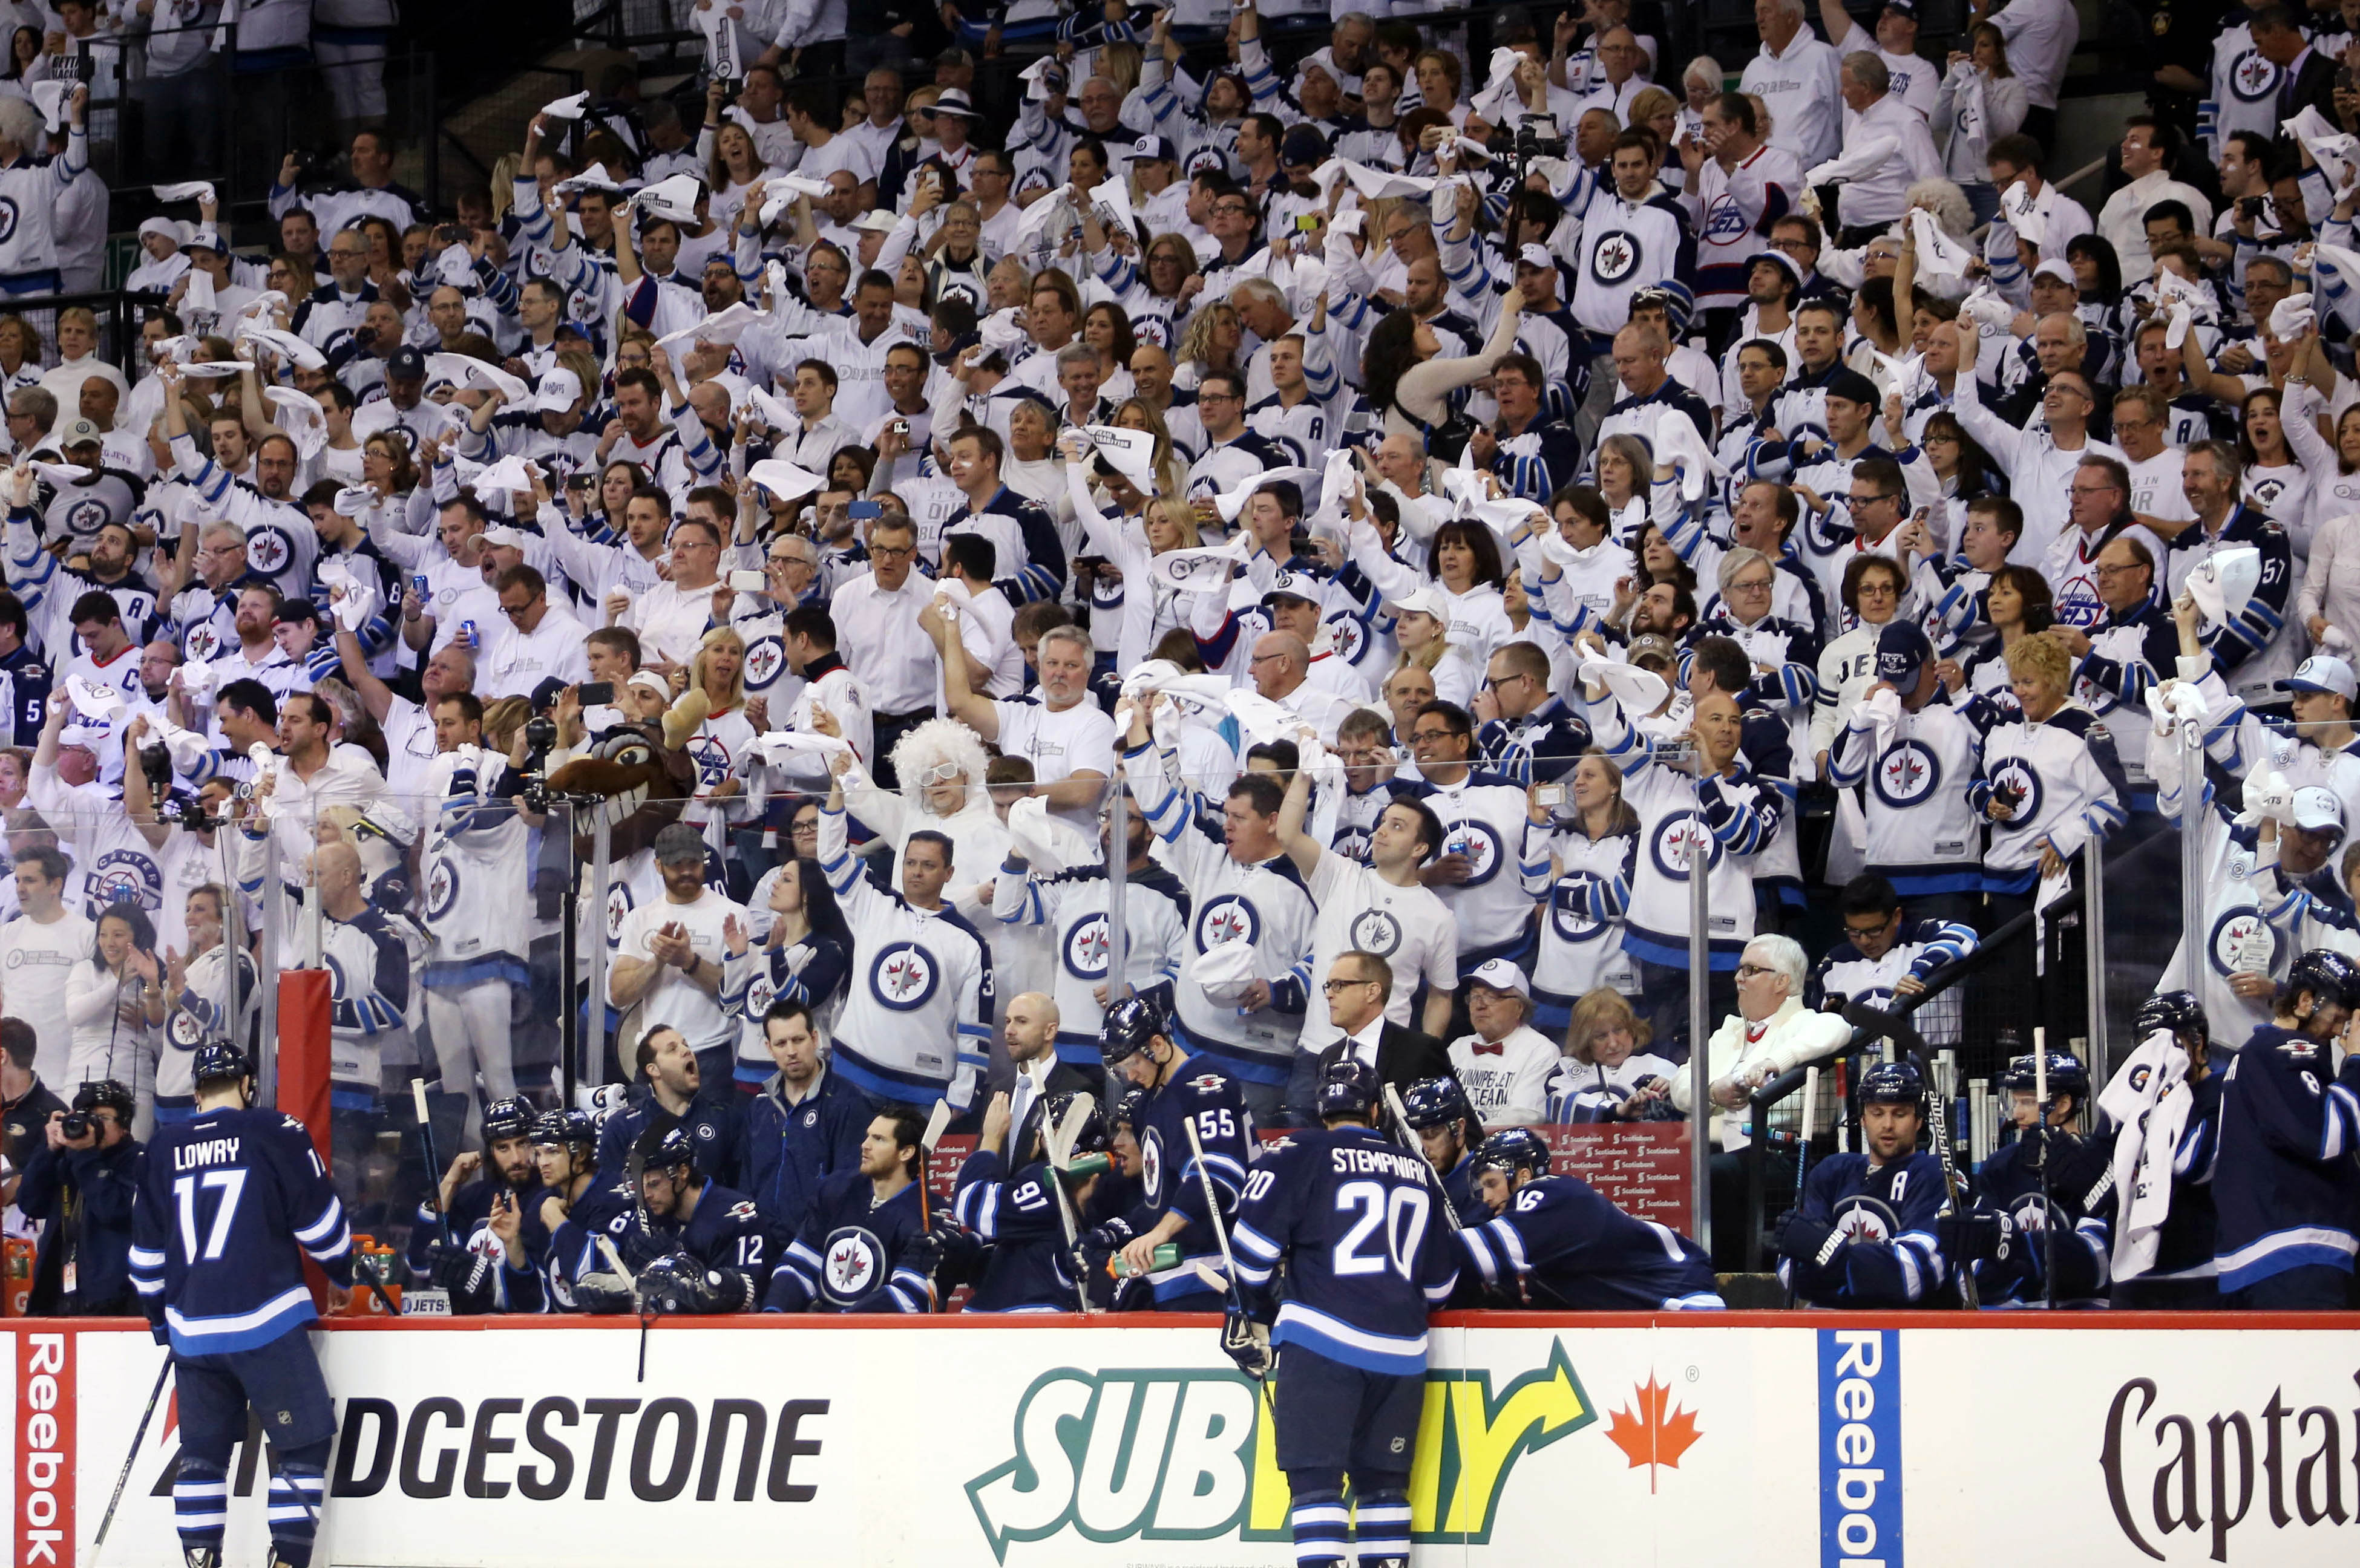 Winnipeg fans are decked out in white for the city's first Stanley Cup playoff game since 1996. (Bruce Fedyck, USA TODAY Sports)